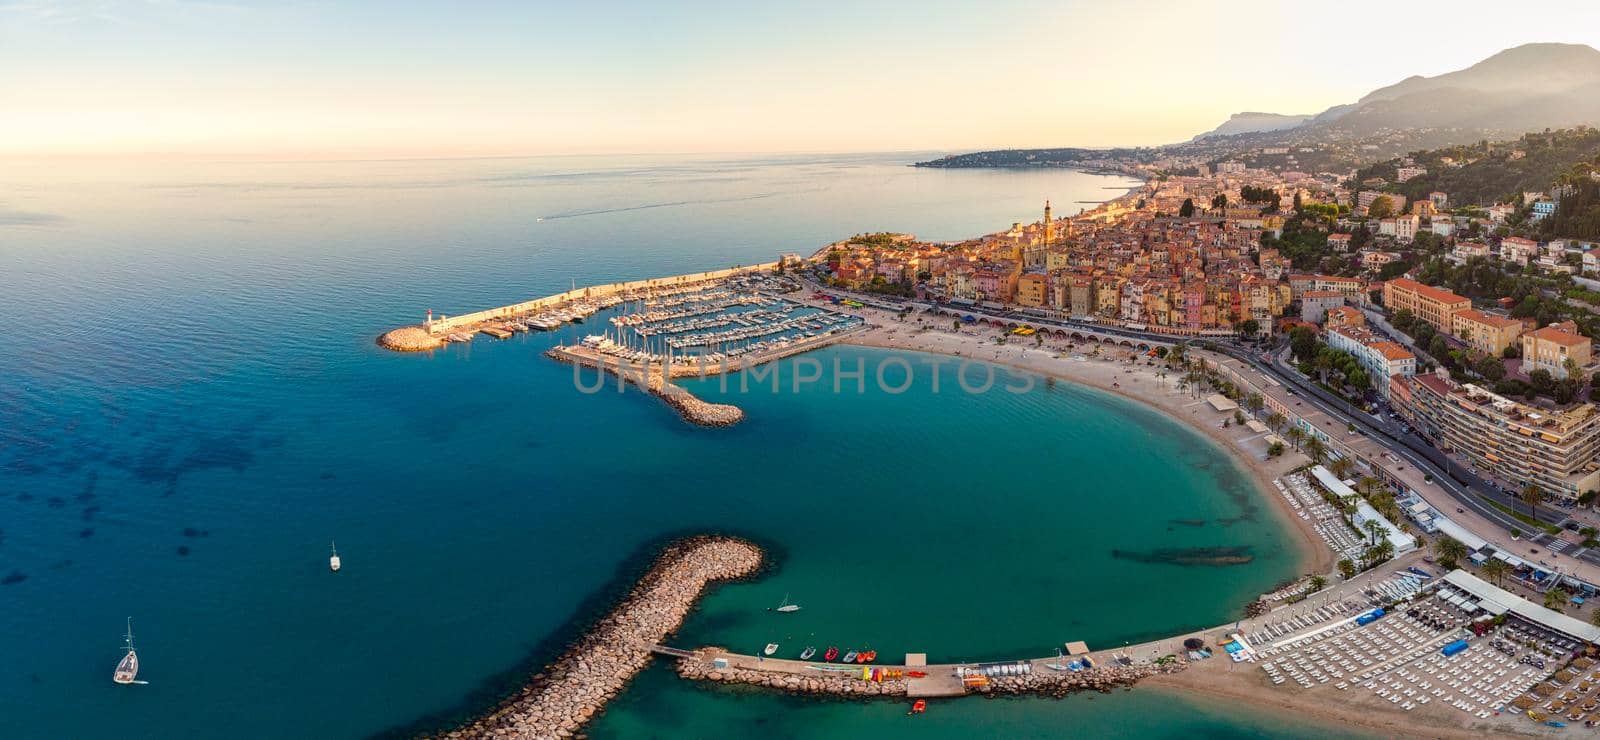  Sand beach beneath the colorful old town Menton on french Riviera, France by fokkebok